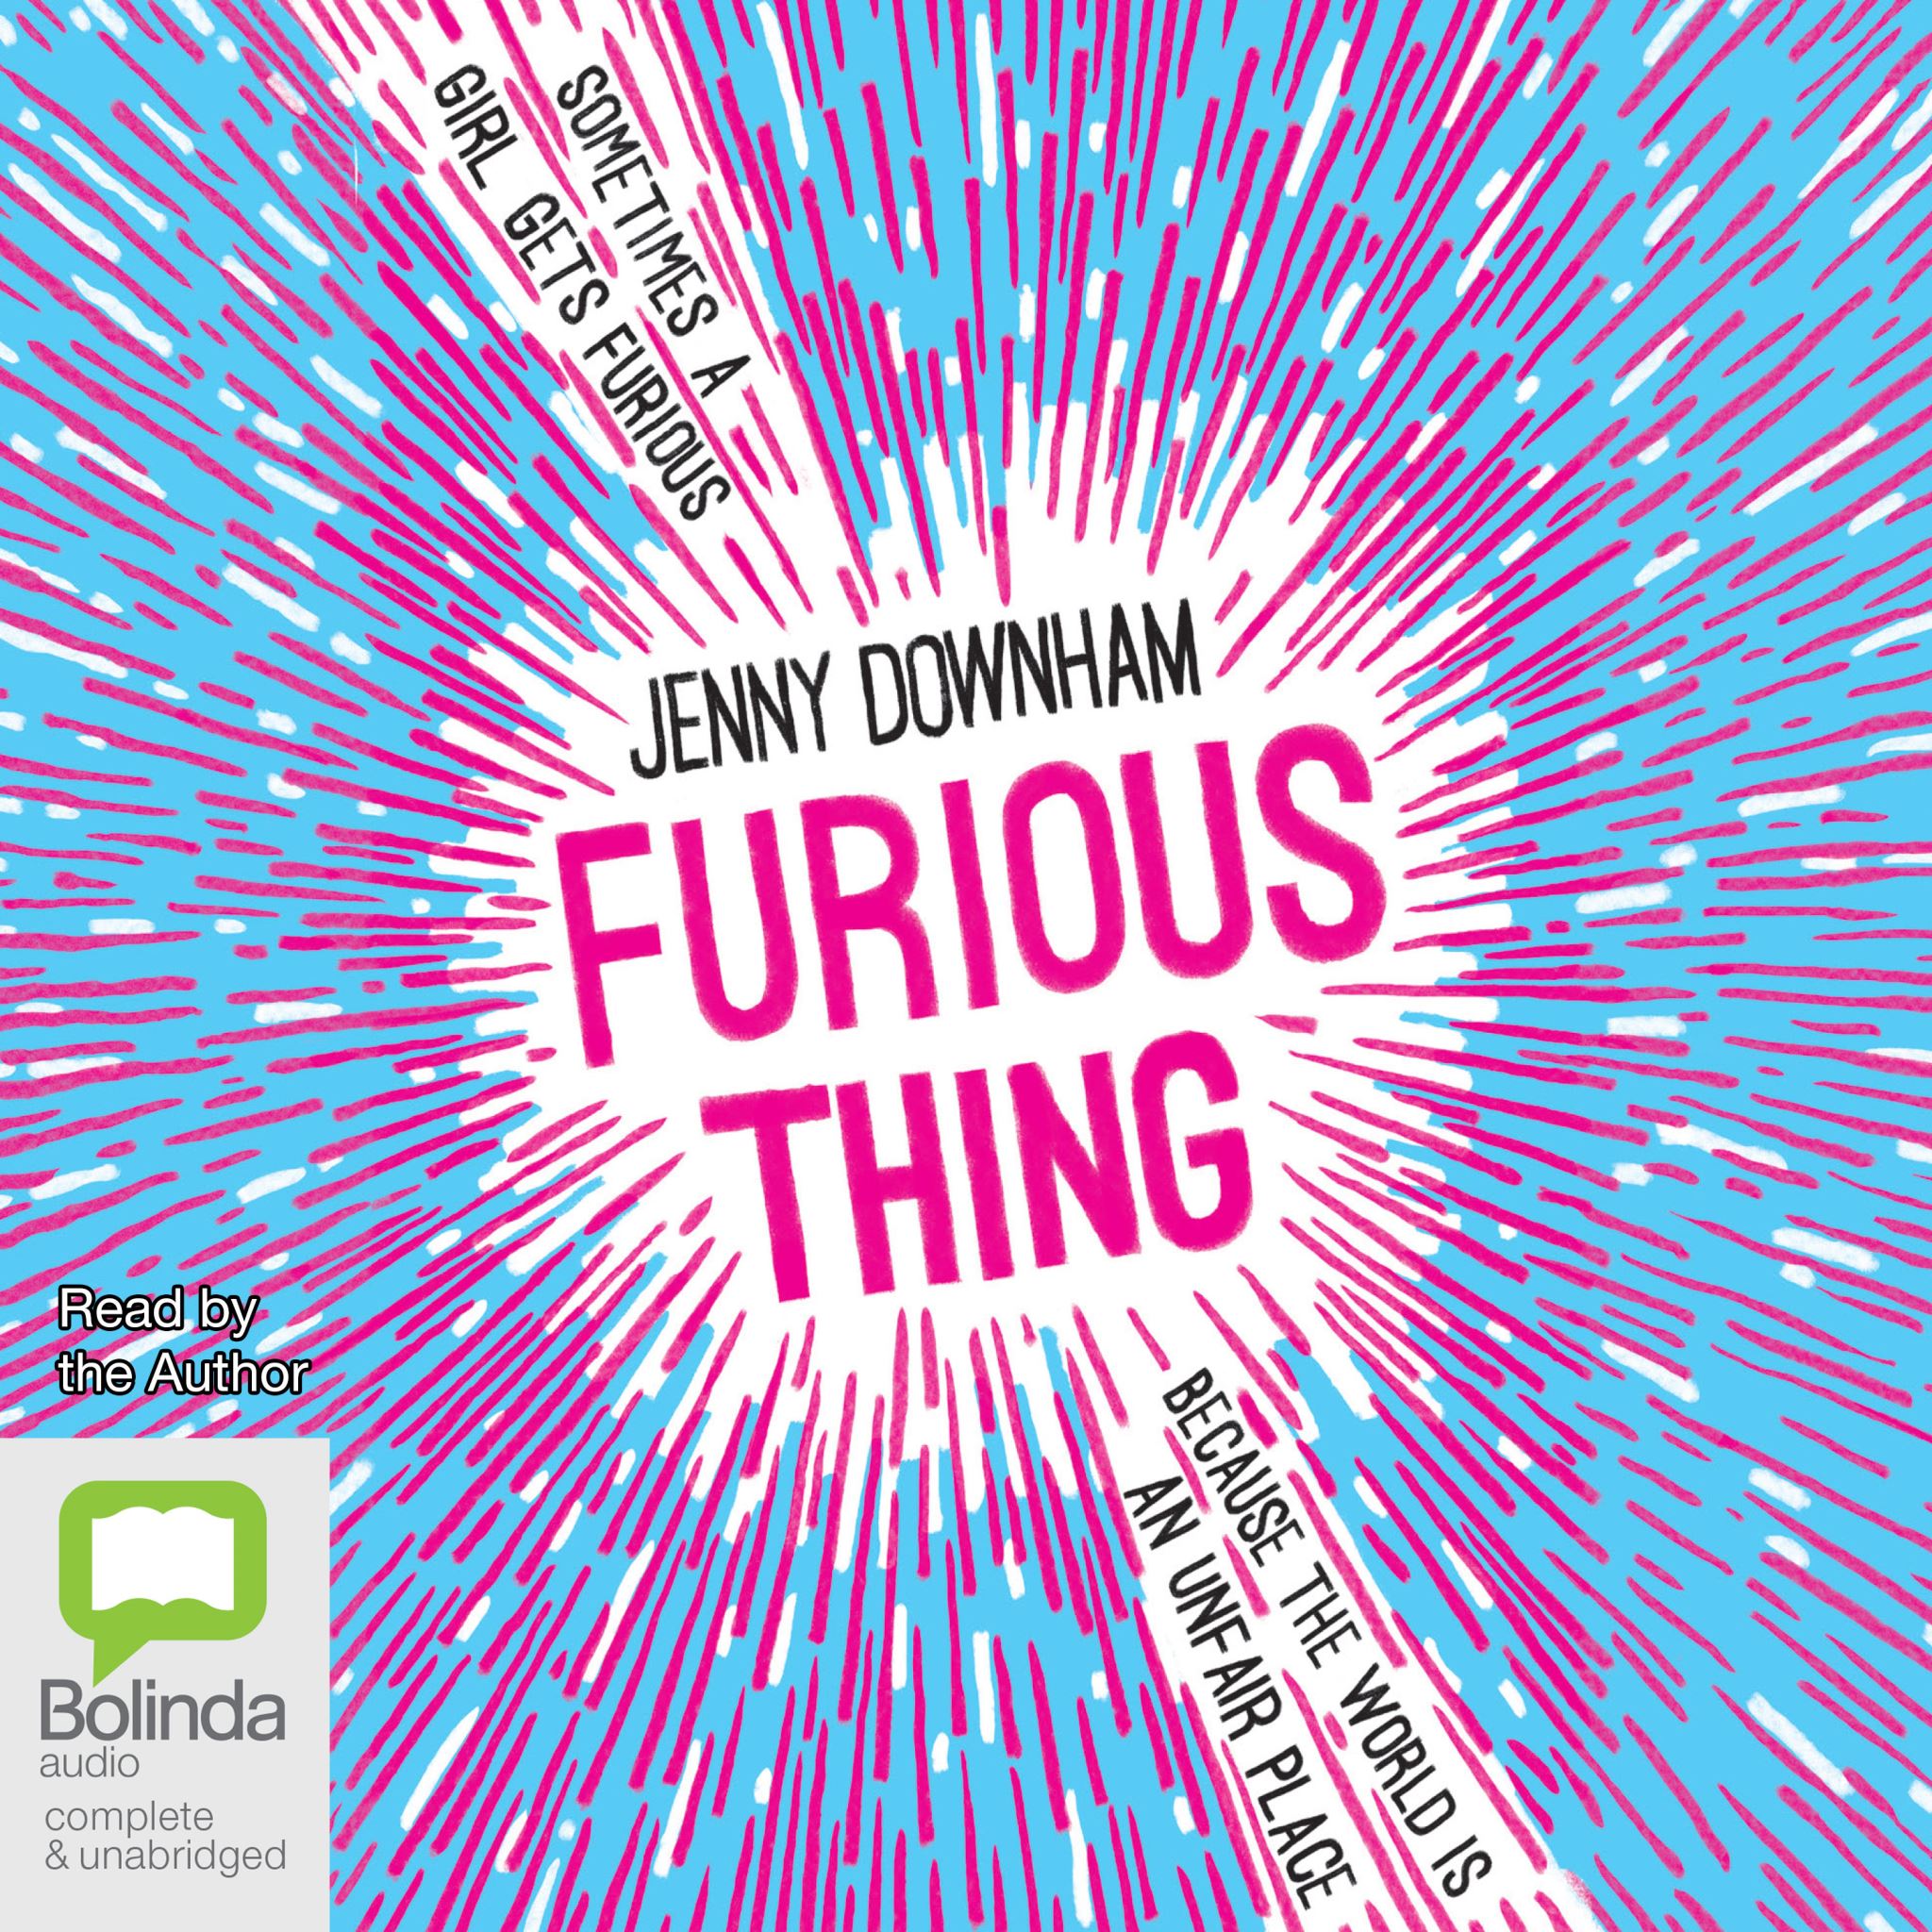 Furious Thing - Unbridged Audio Book on CD